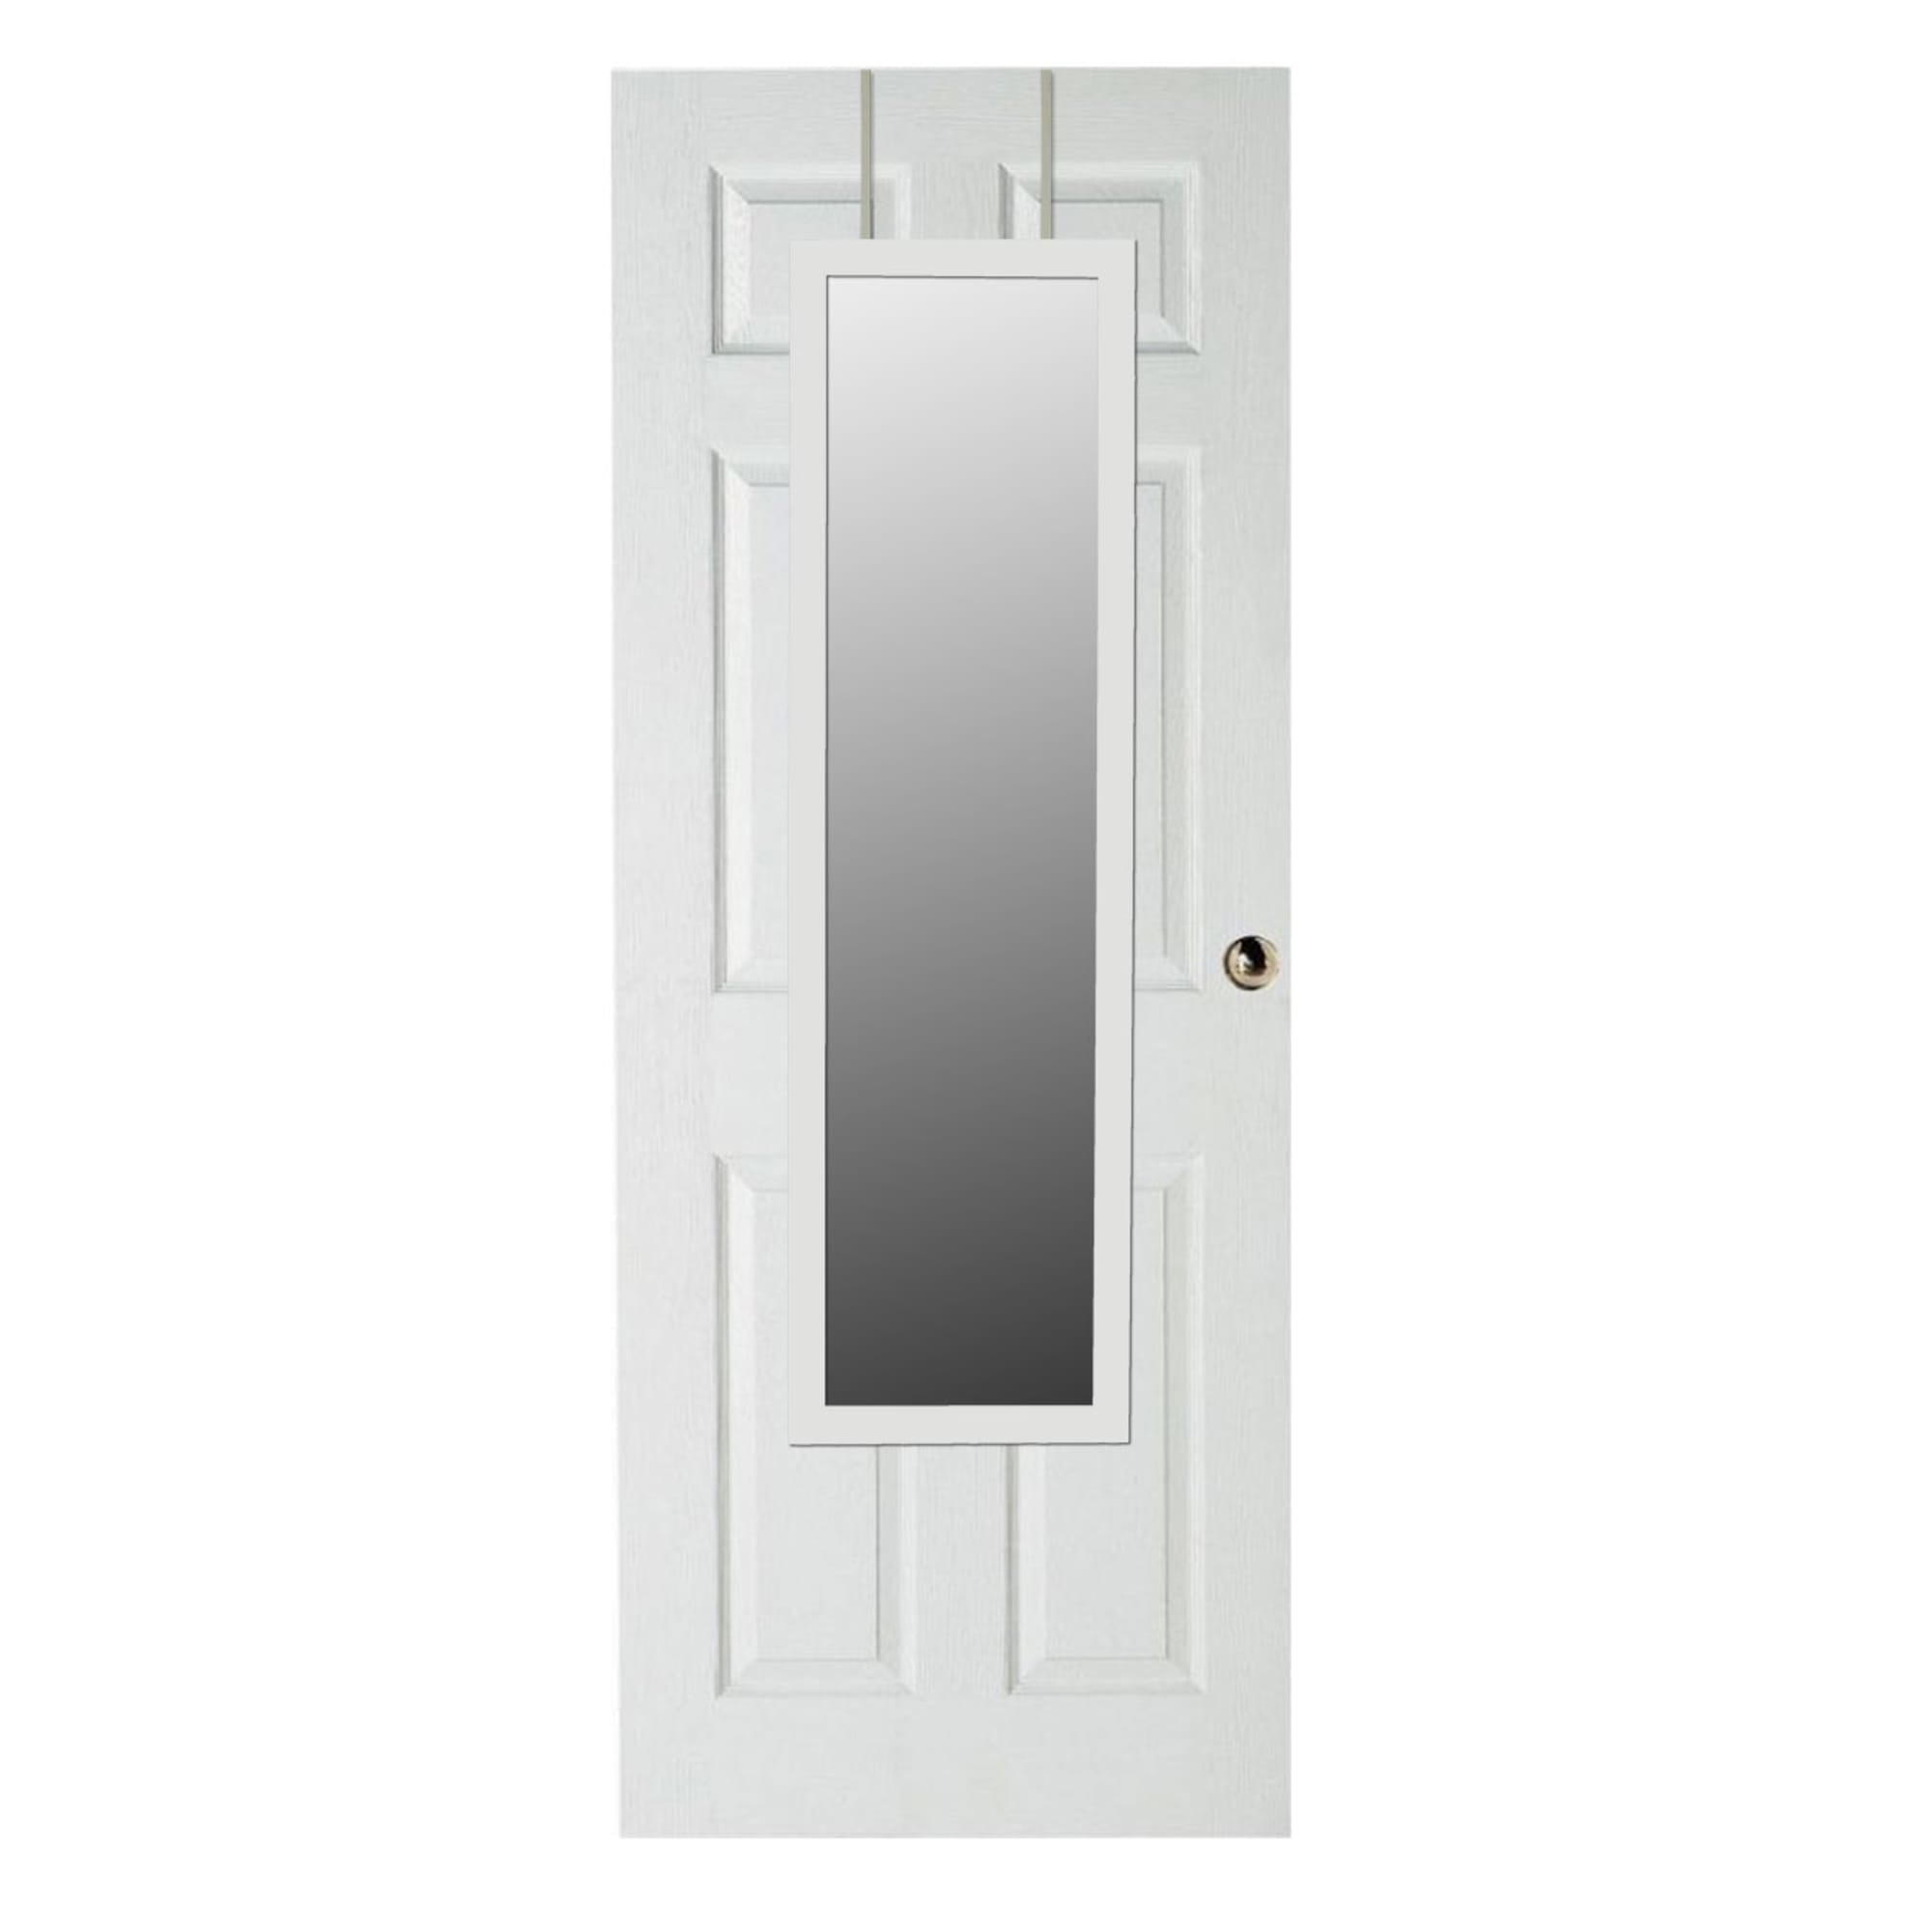 Home Basics Over The Door Mirror, White $12.00 EACH, CASE PACK OF 6